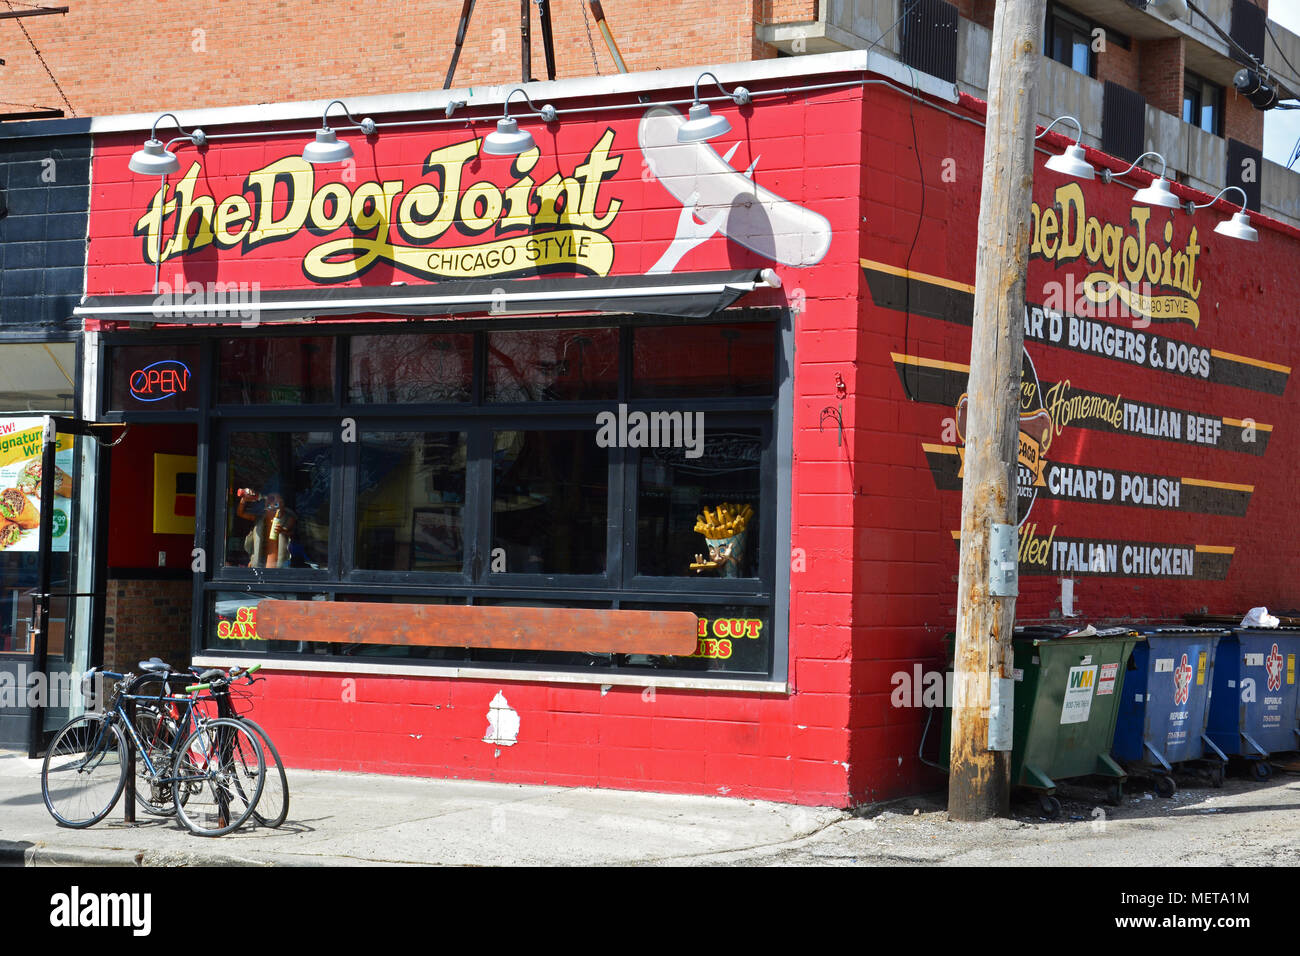 The Dog Joint is a classic hot dog stand on Armitage Ave. near the lake in Chicago's north side Lincoln Park neighborhood. Stock Photo